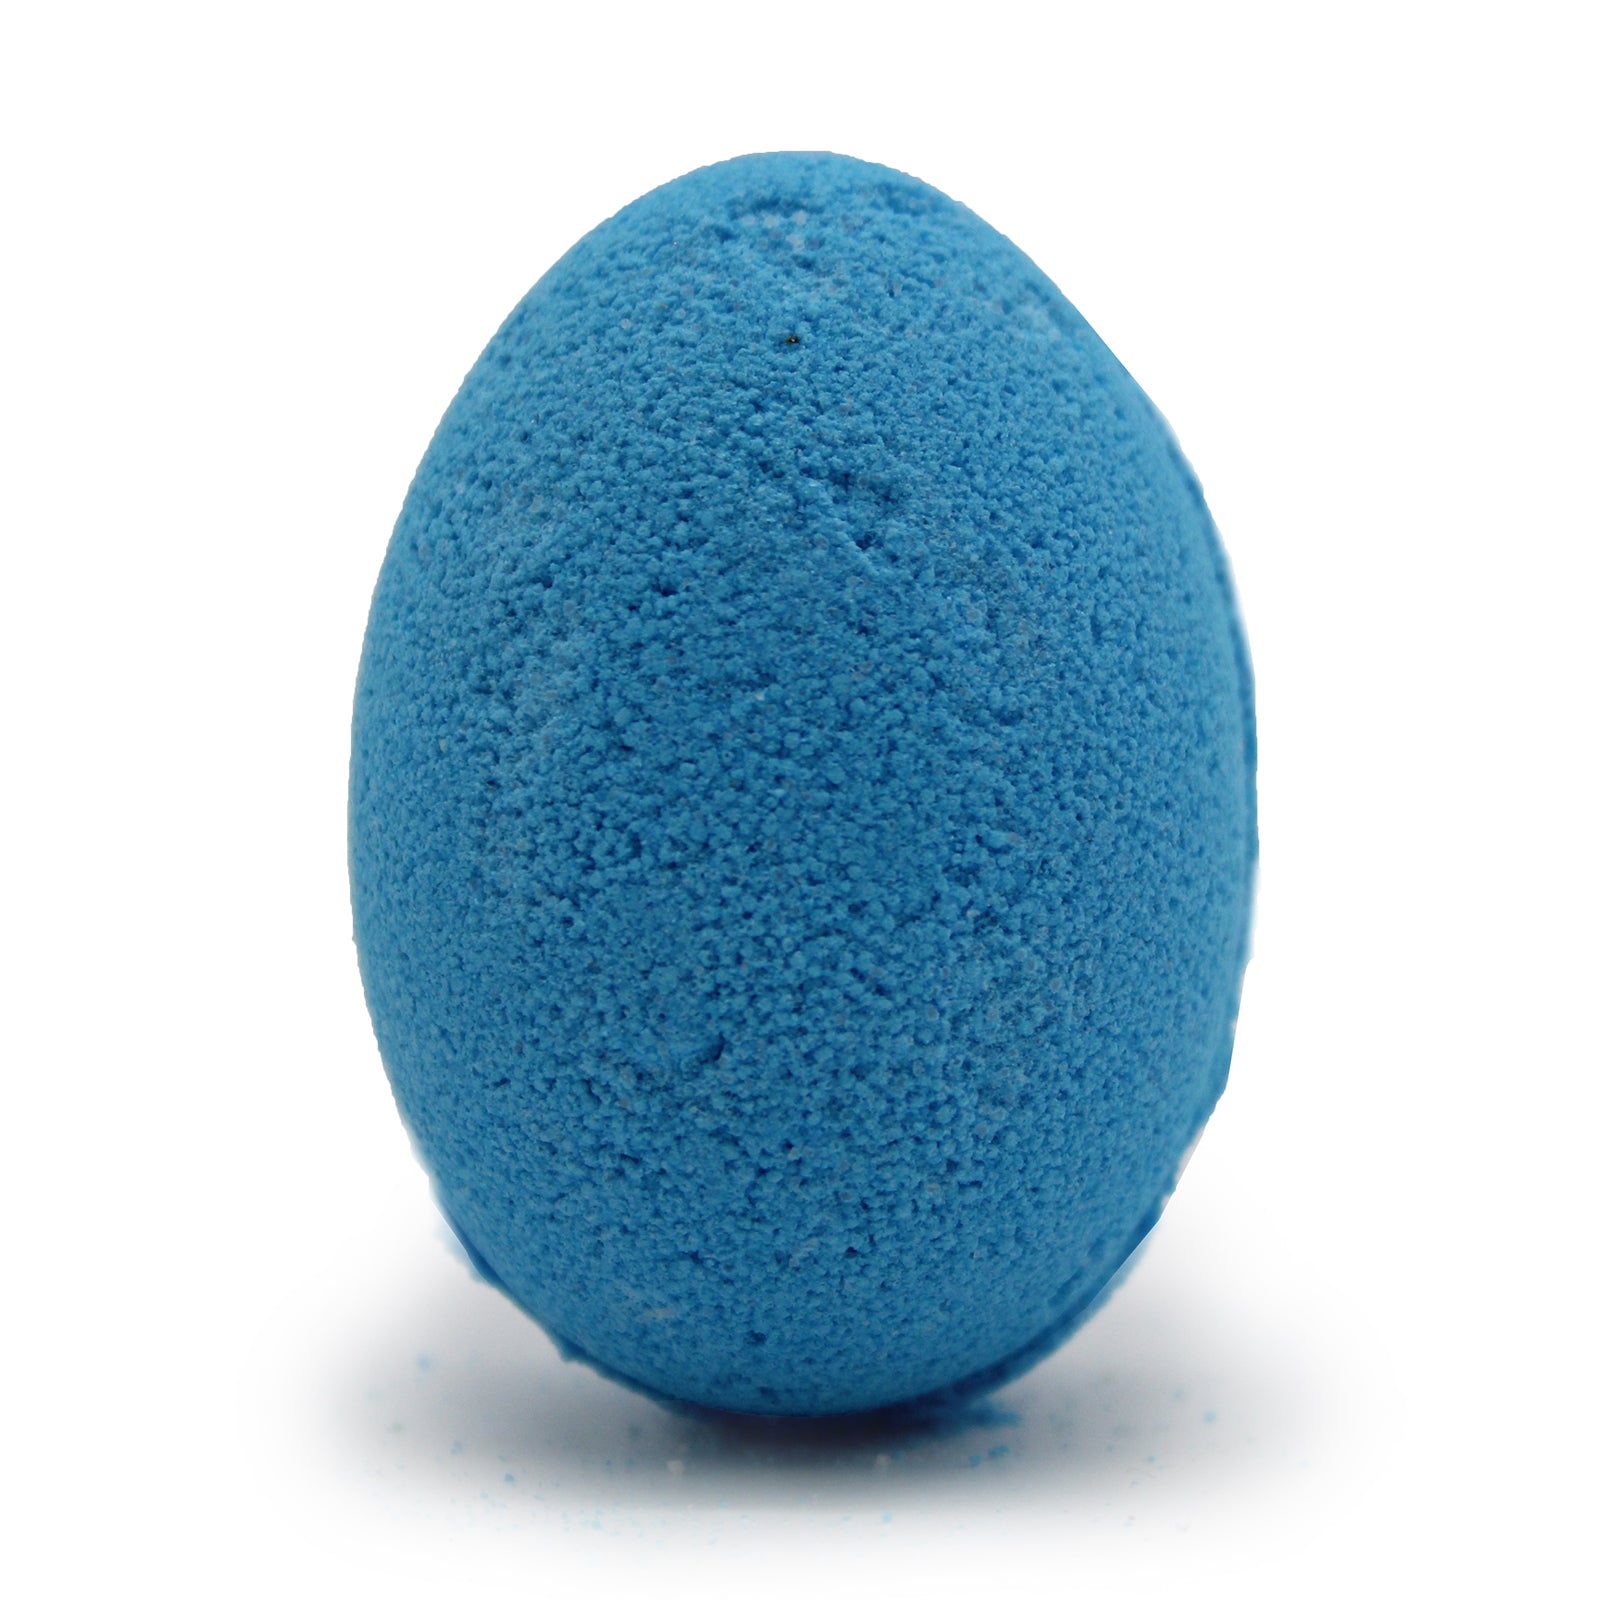 View Pack of 6 Bath Eggs Blueberry information